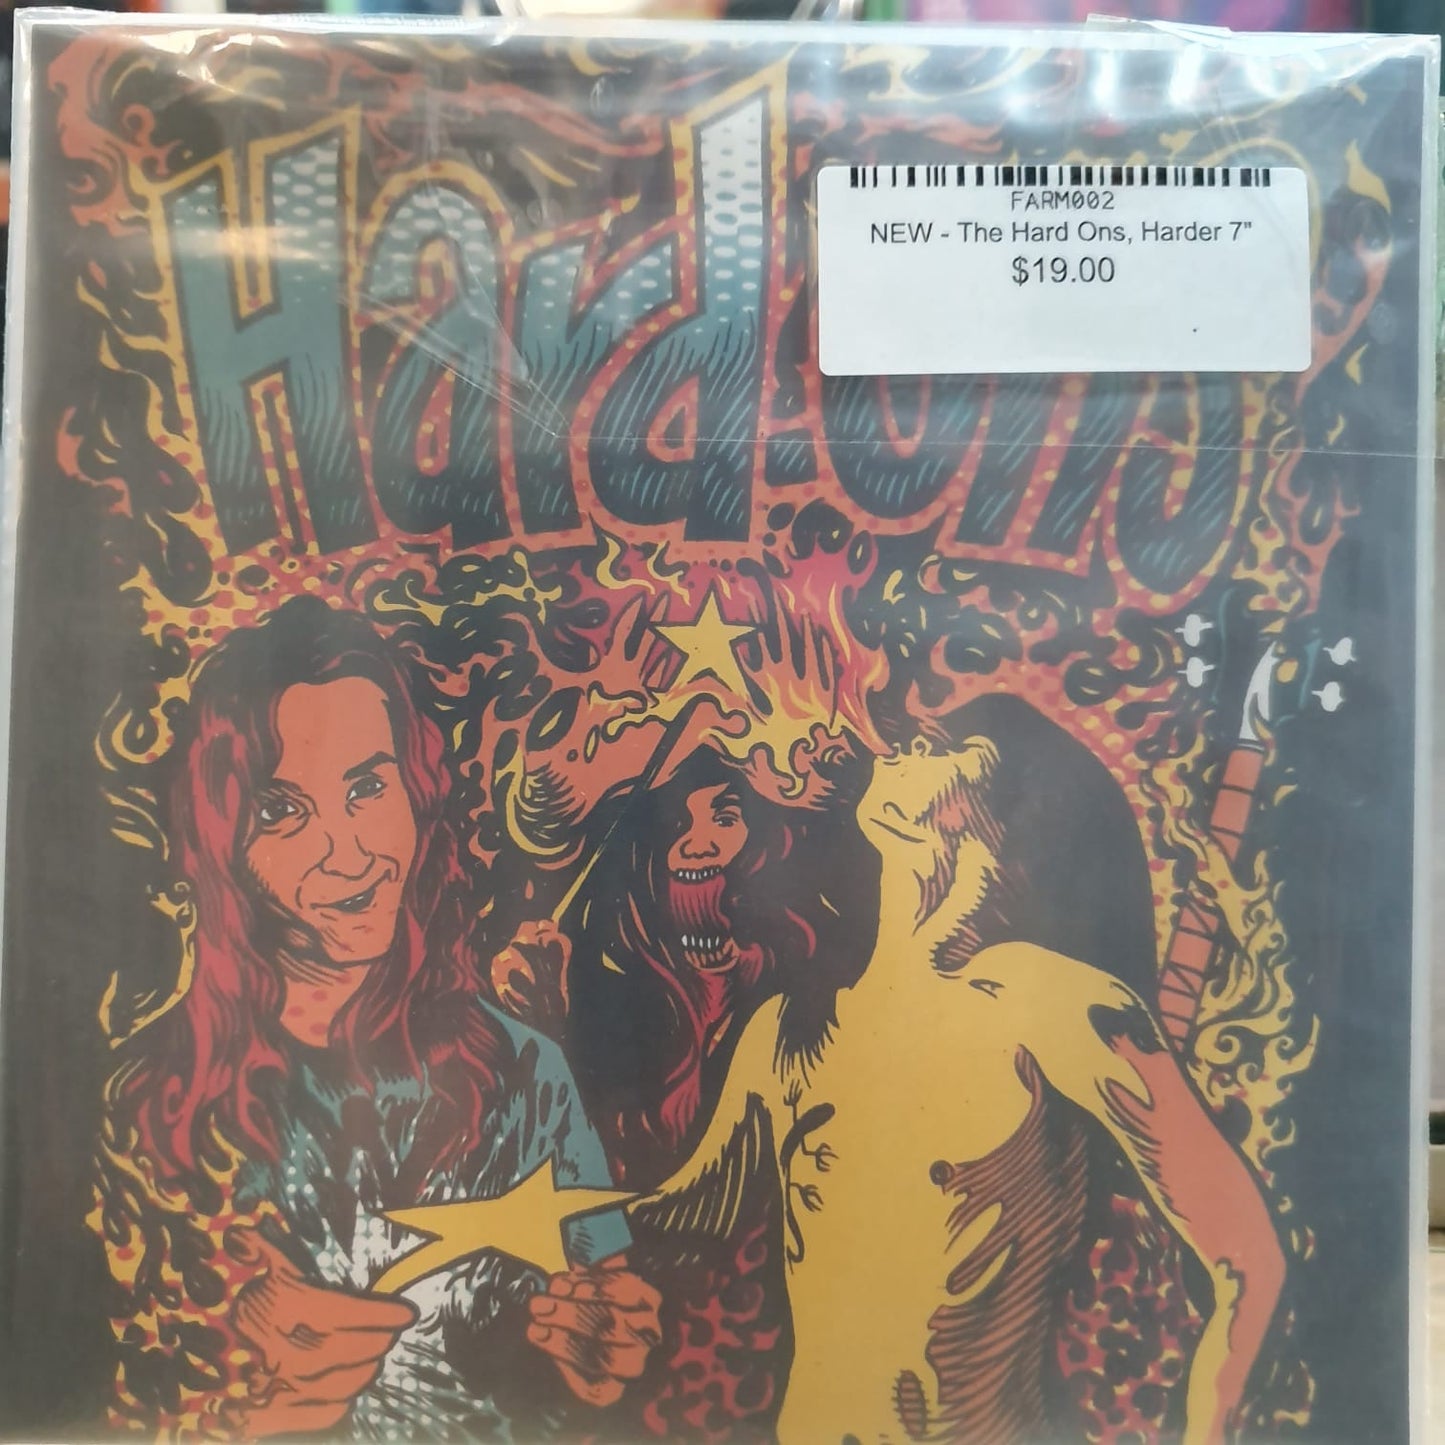 NEW - Hard Ons (The), Harder and Harder 7"